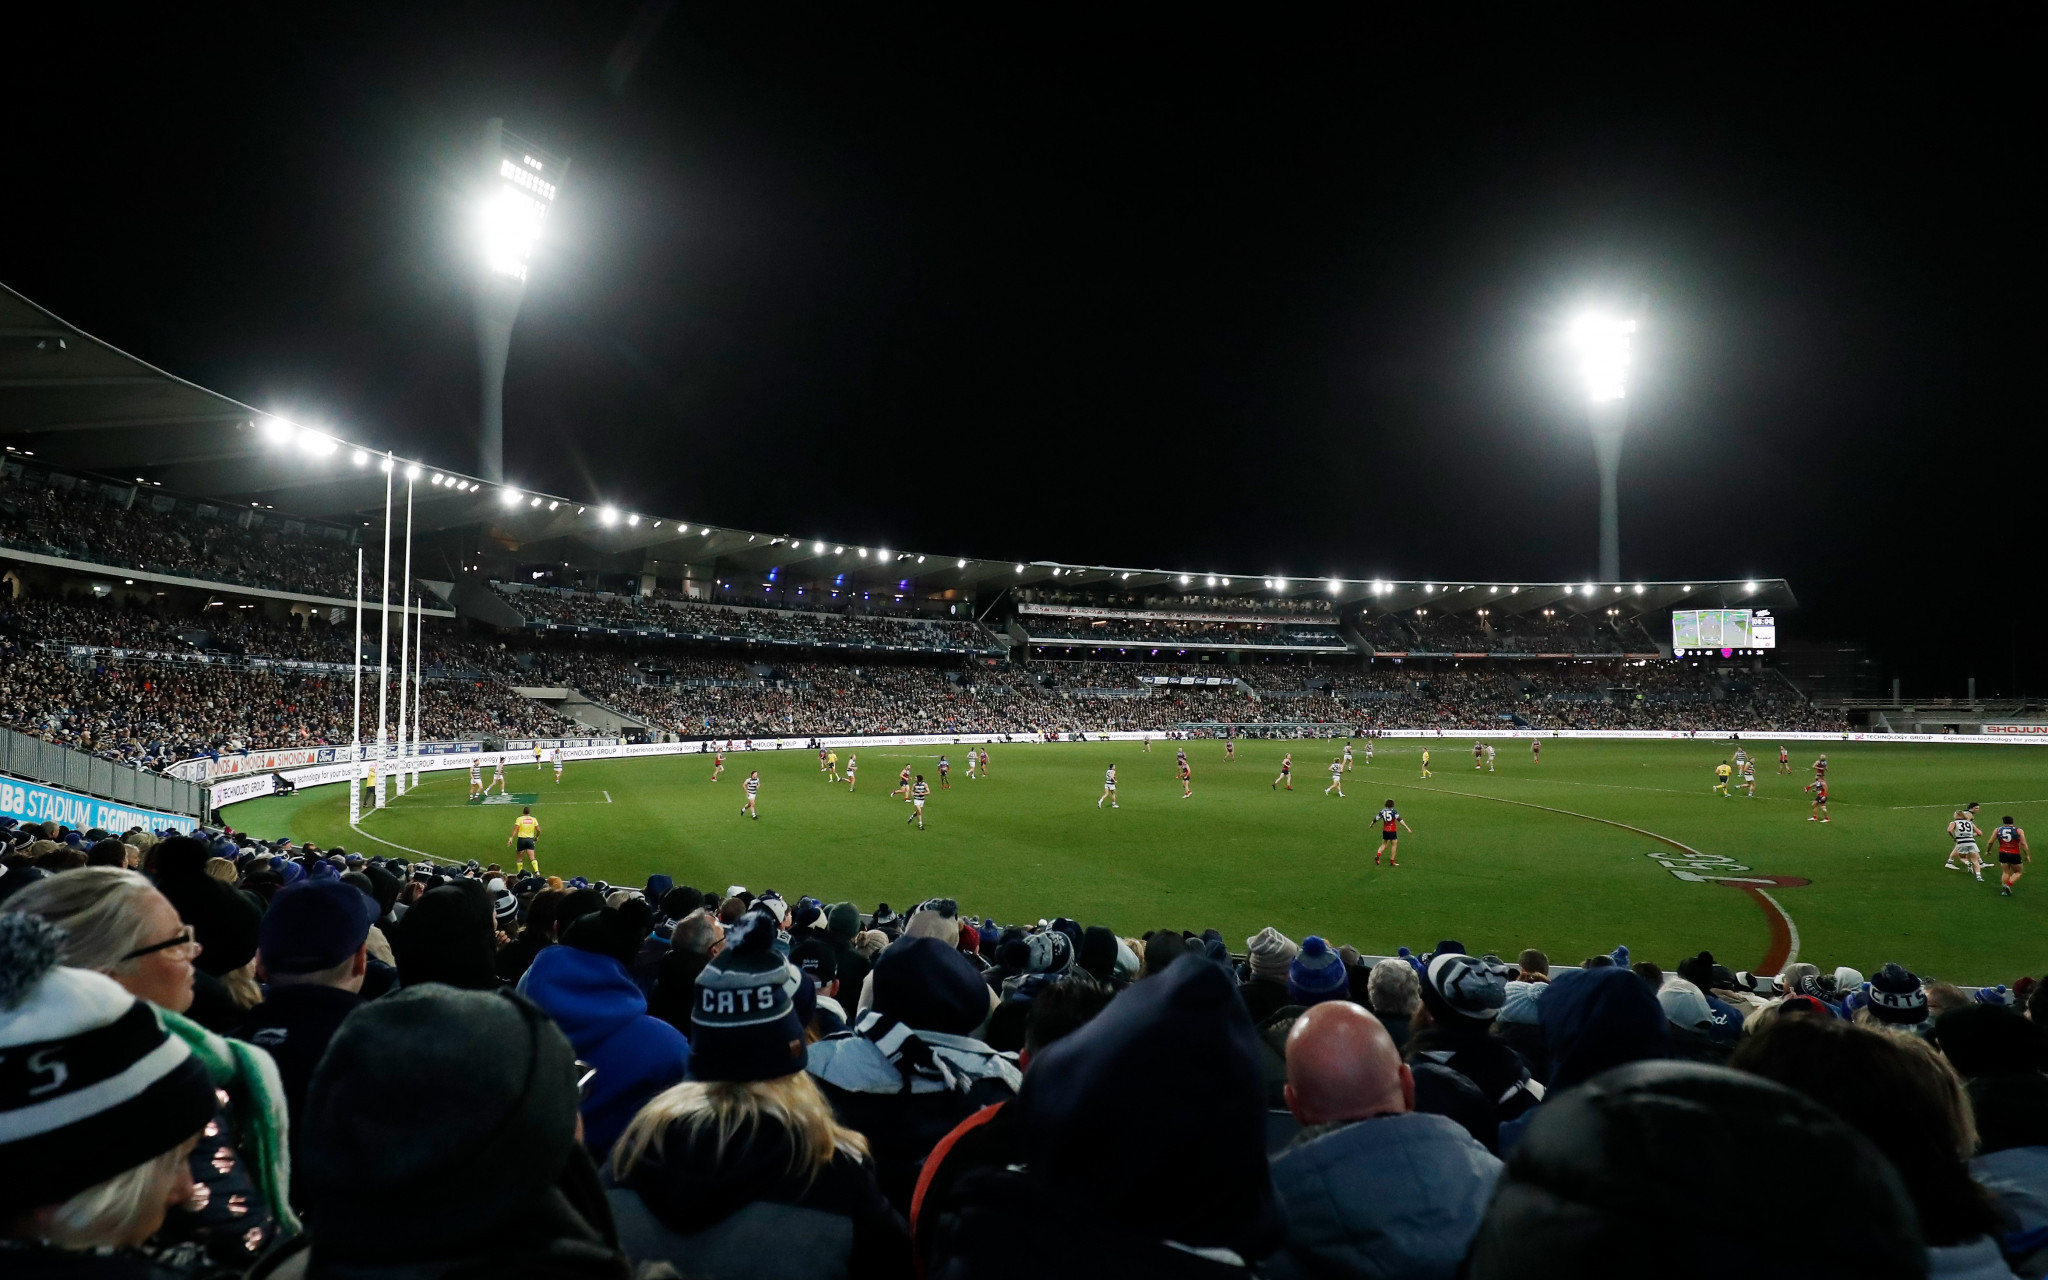 Kardinia Park in Geelong is undergoing a major revamp thanks to support from the Victorian Government as it looks to host the Closing Ceremony ©Getty Images